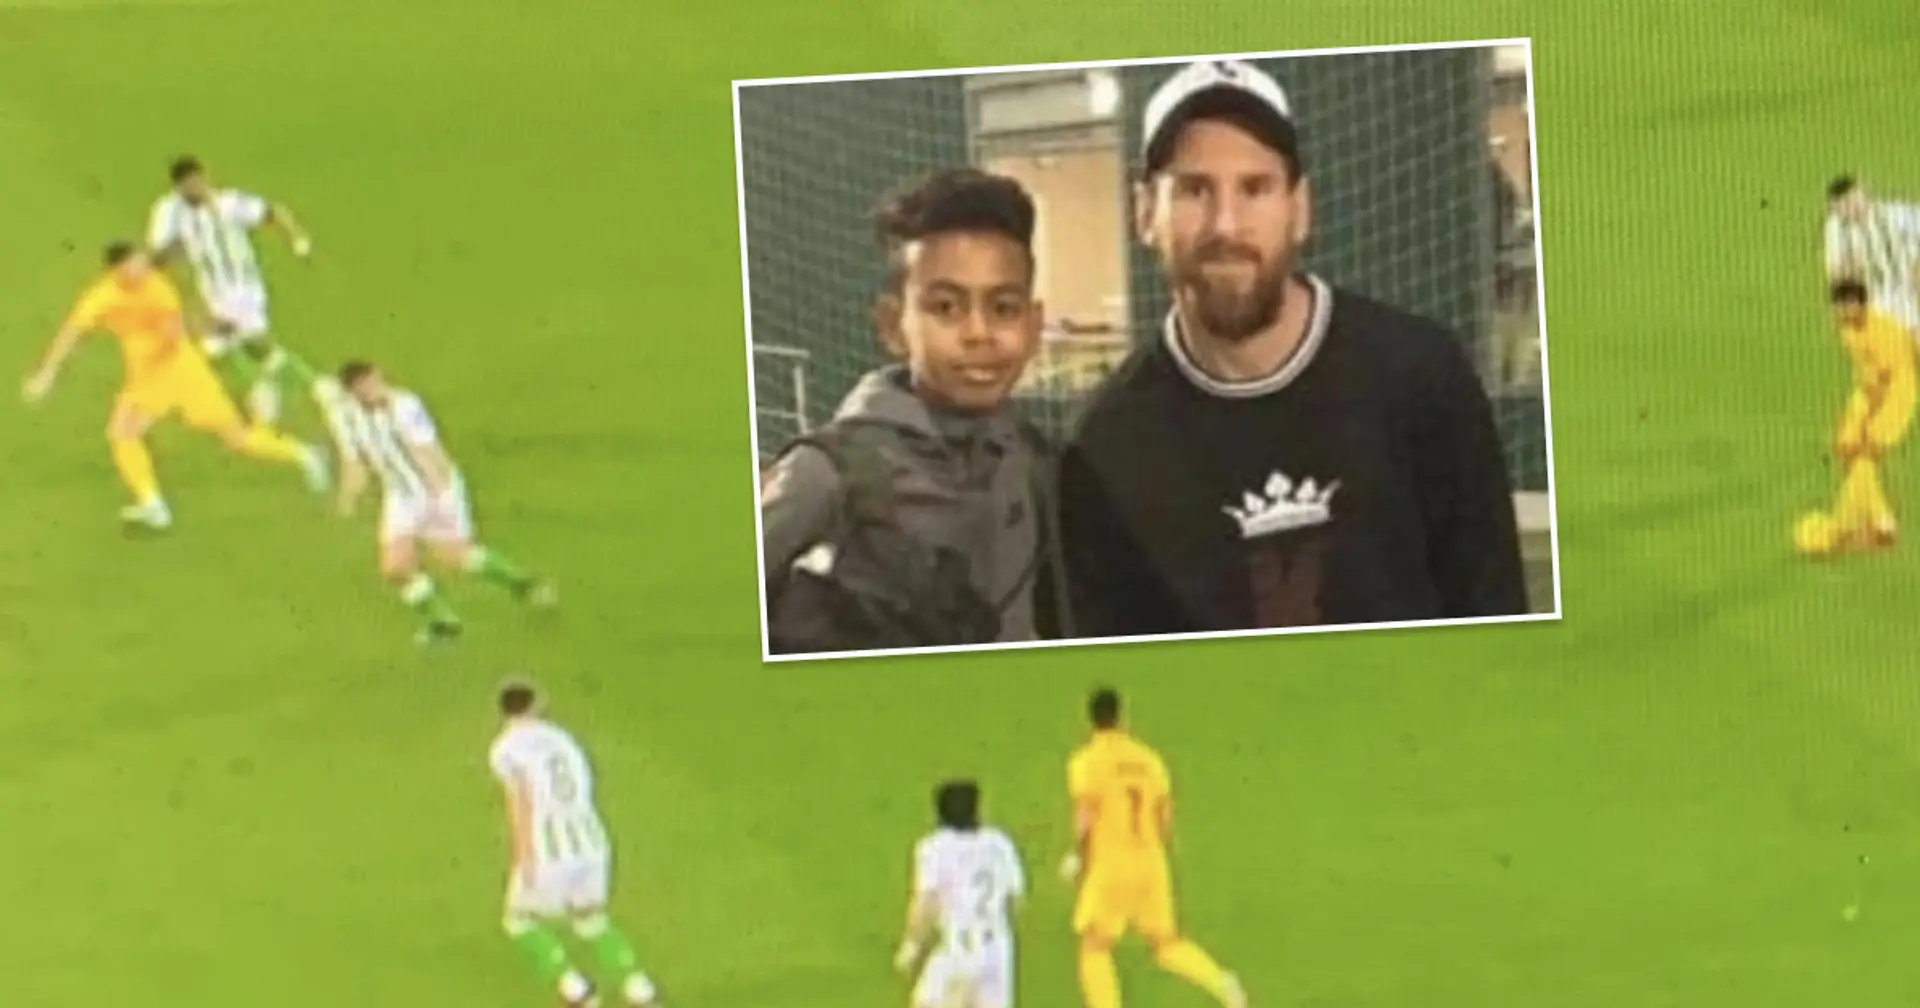 This Lamine Yamal pass v Betis proves he really got that magic Messi touch